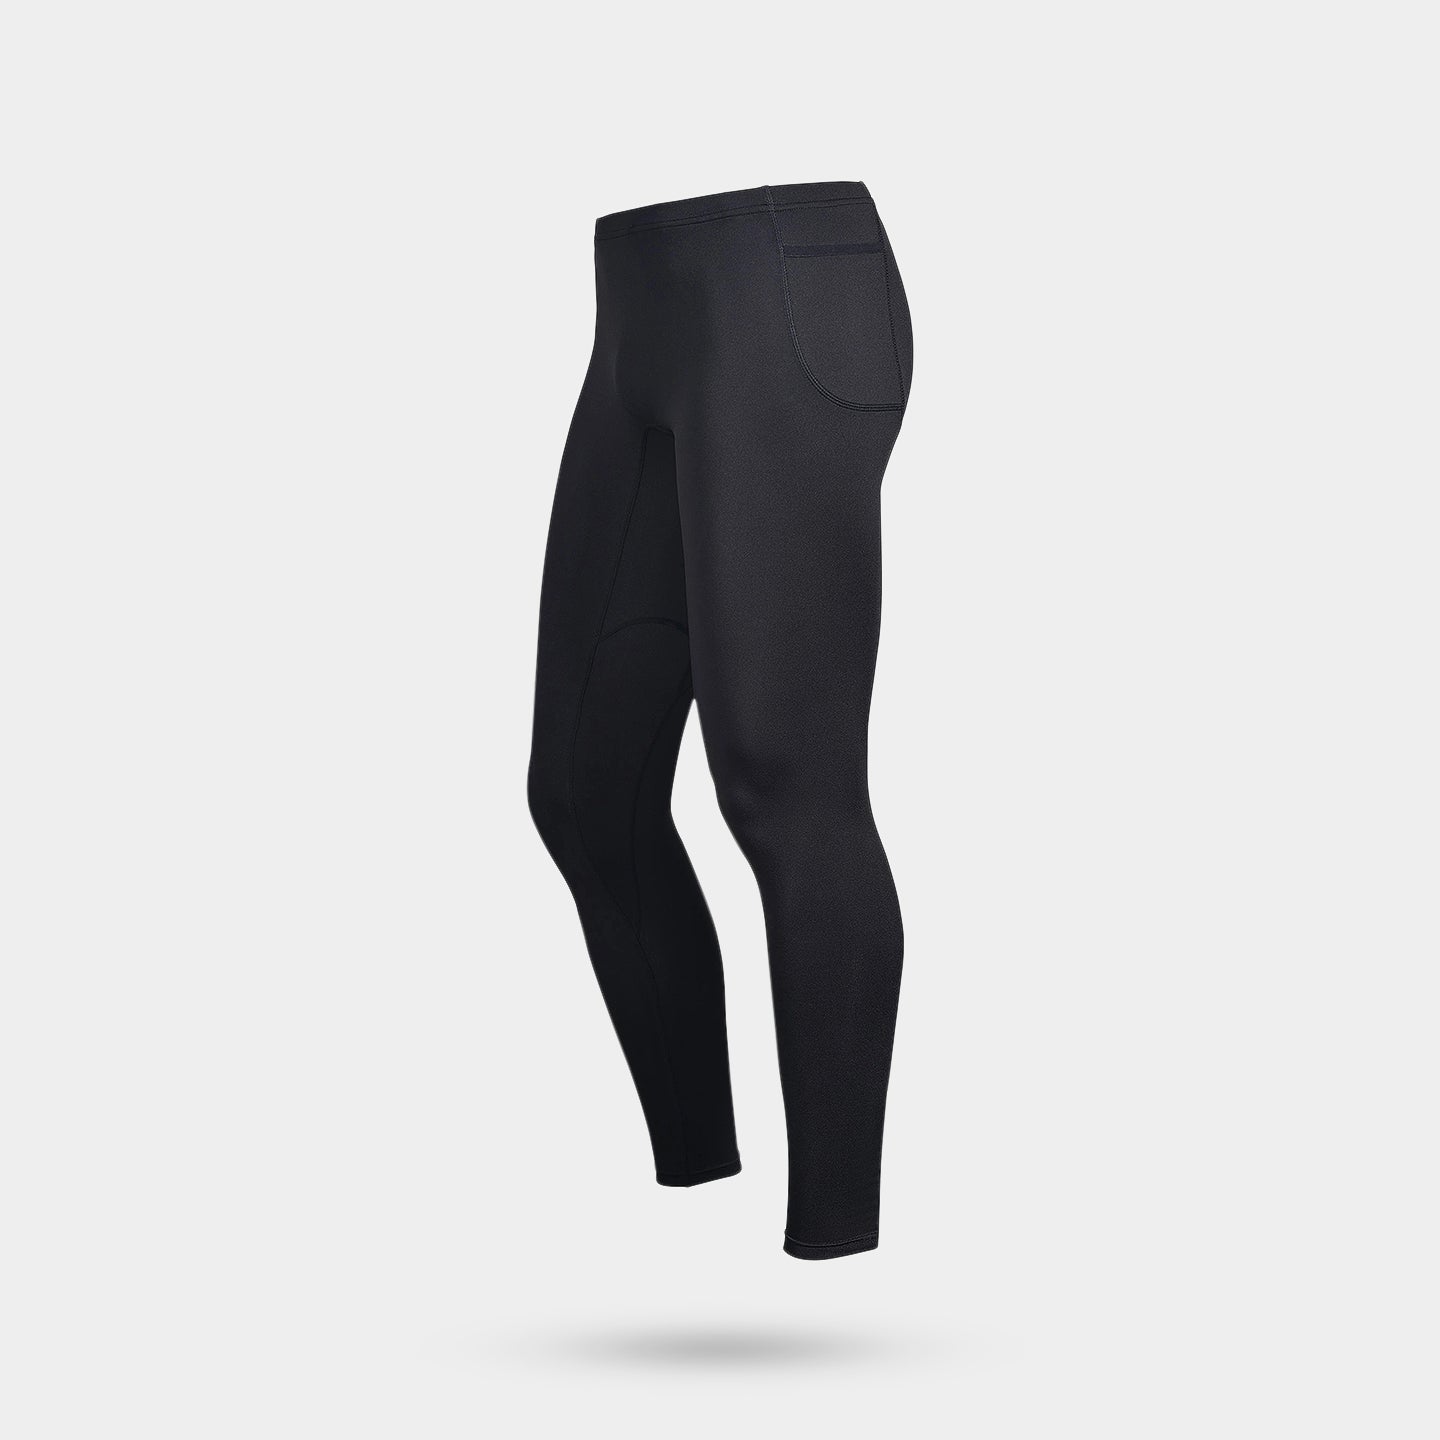 Expert Brand Men's Airstretch Performance Tights Compression Pants A1